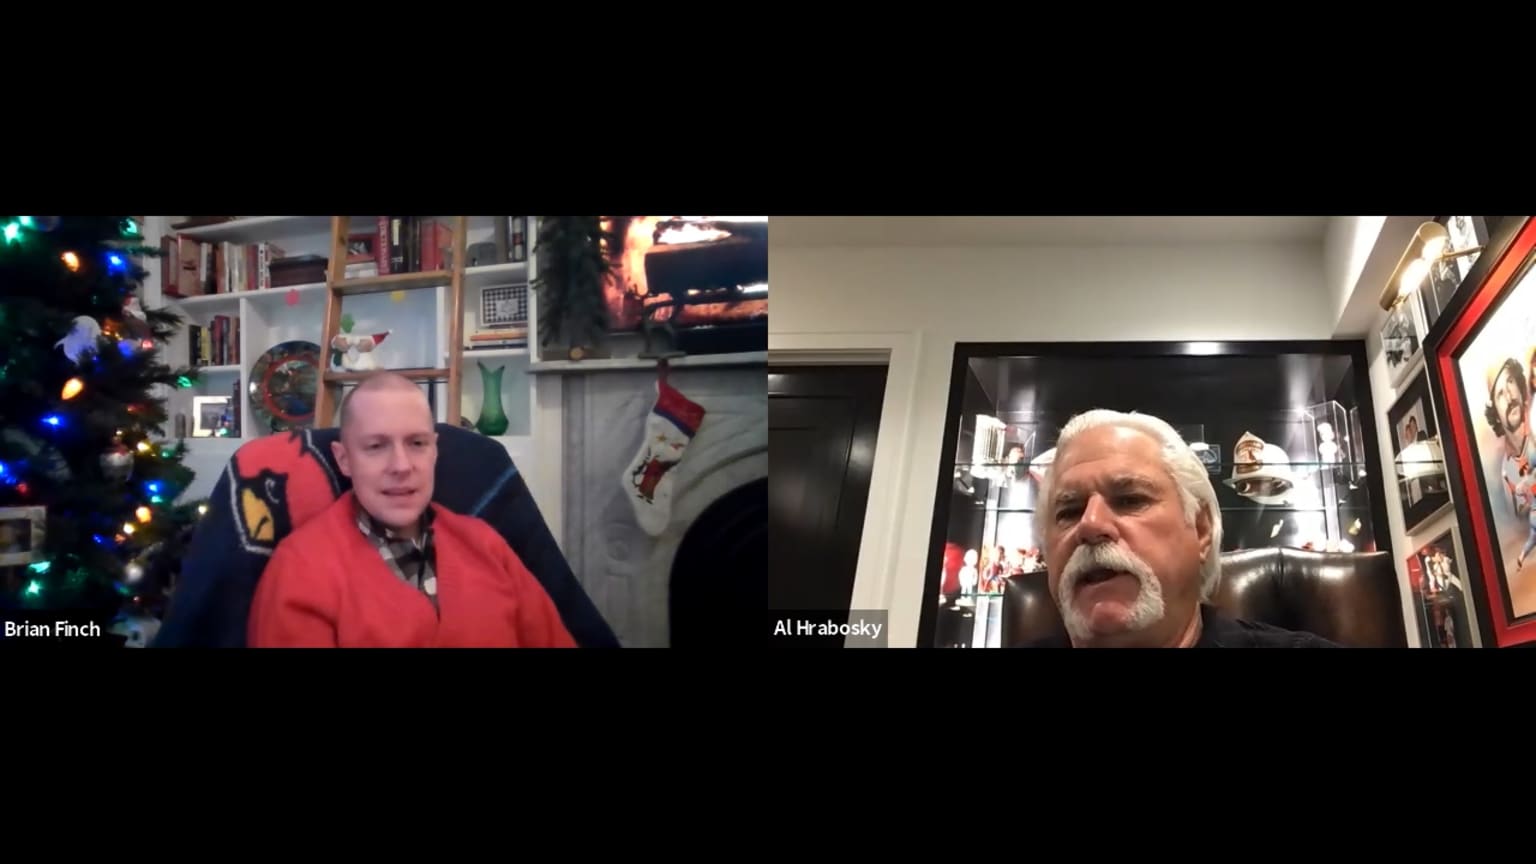 Interview with Al Hrabosky, 12/08/2020